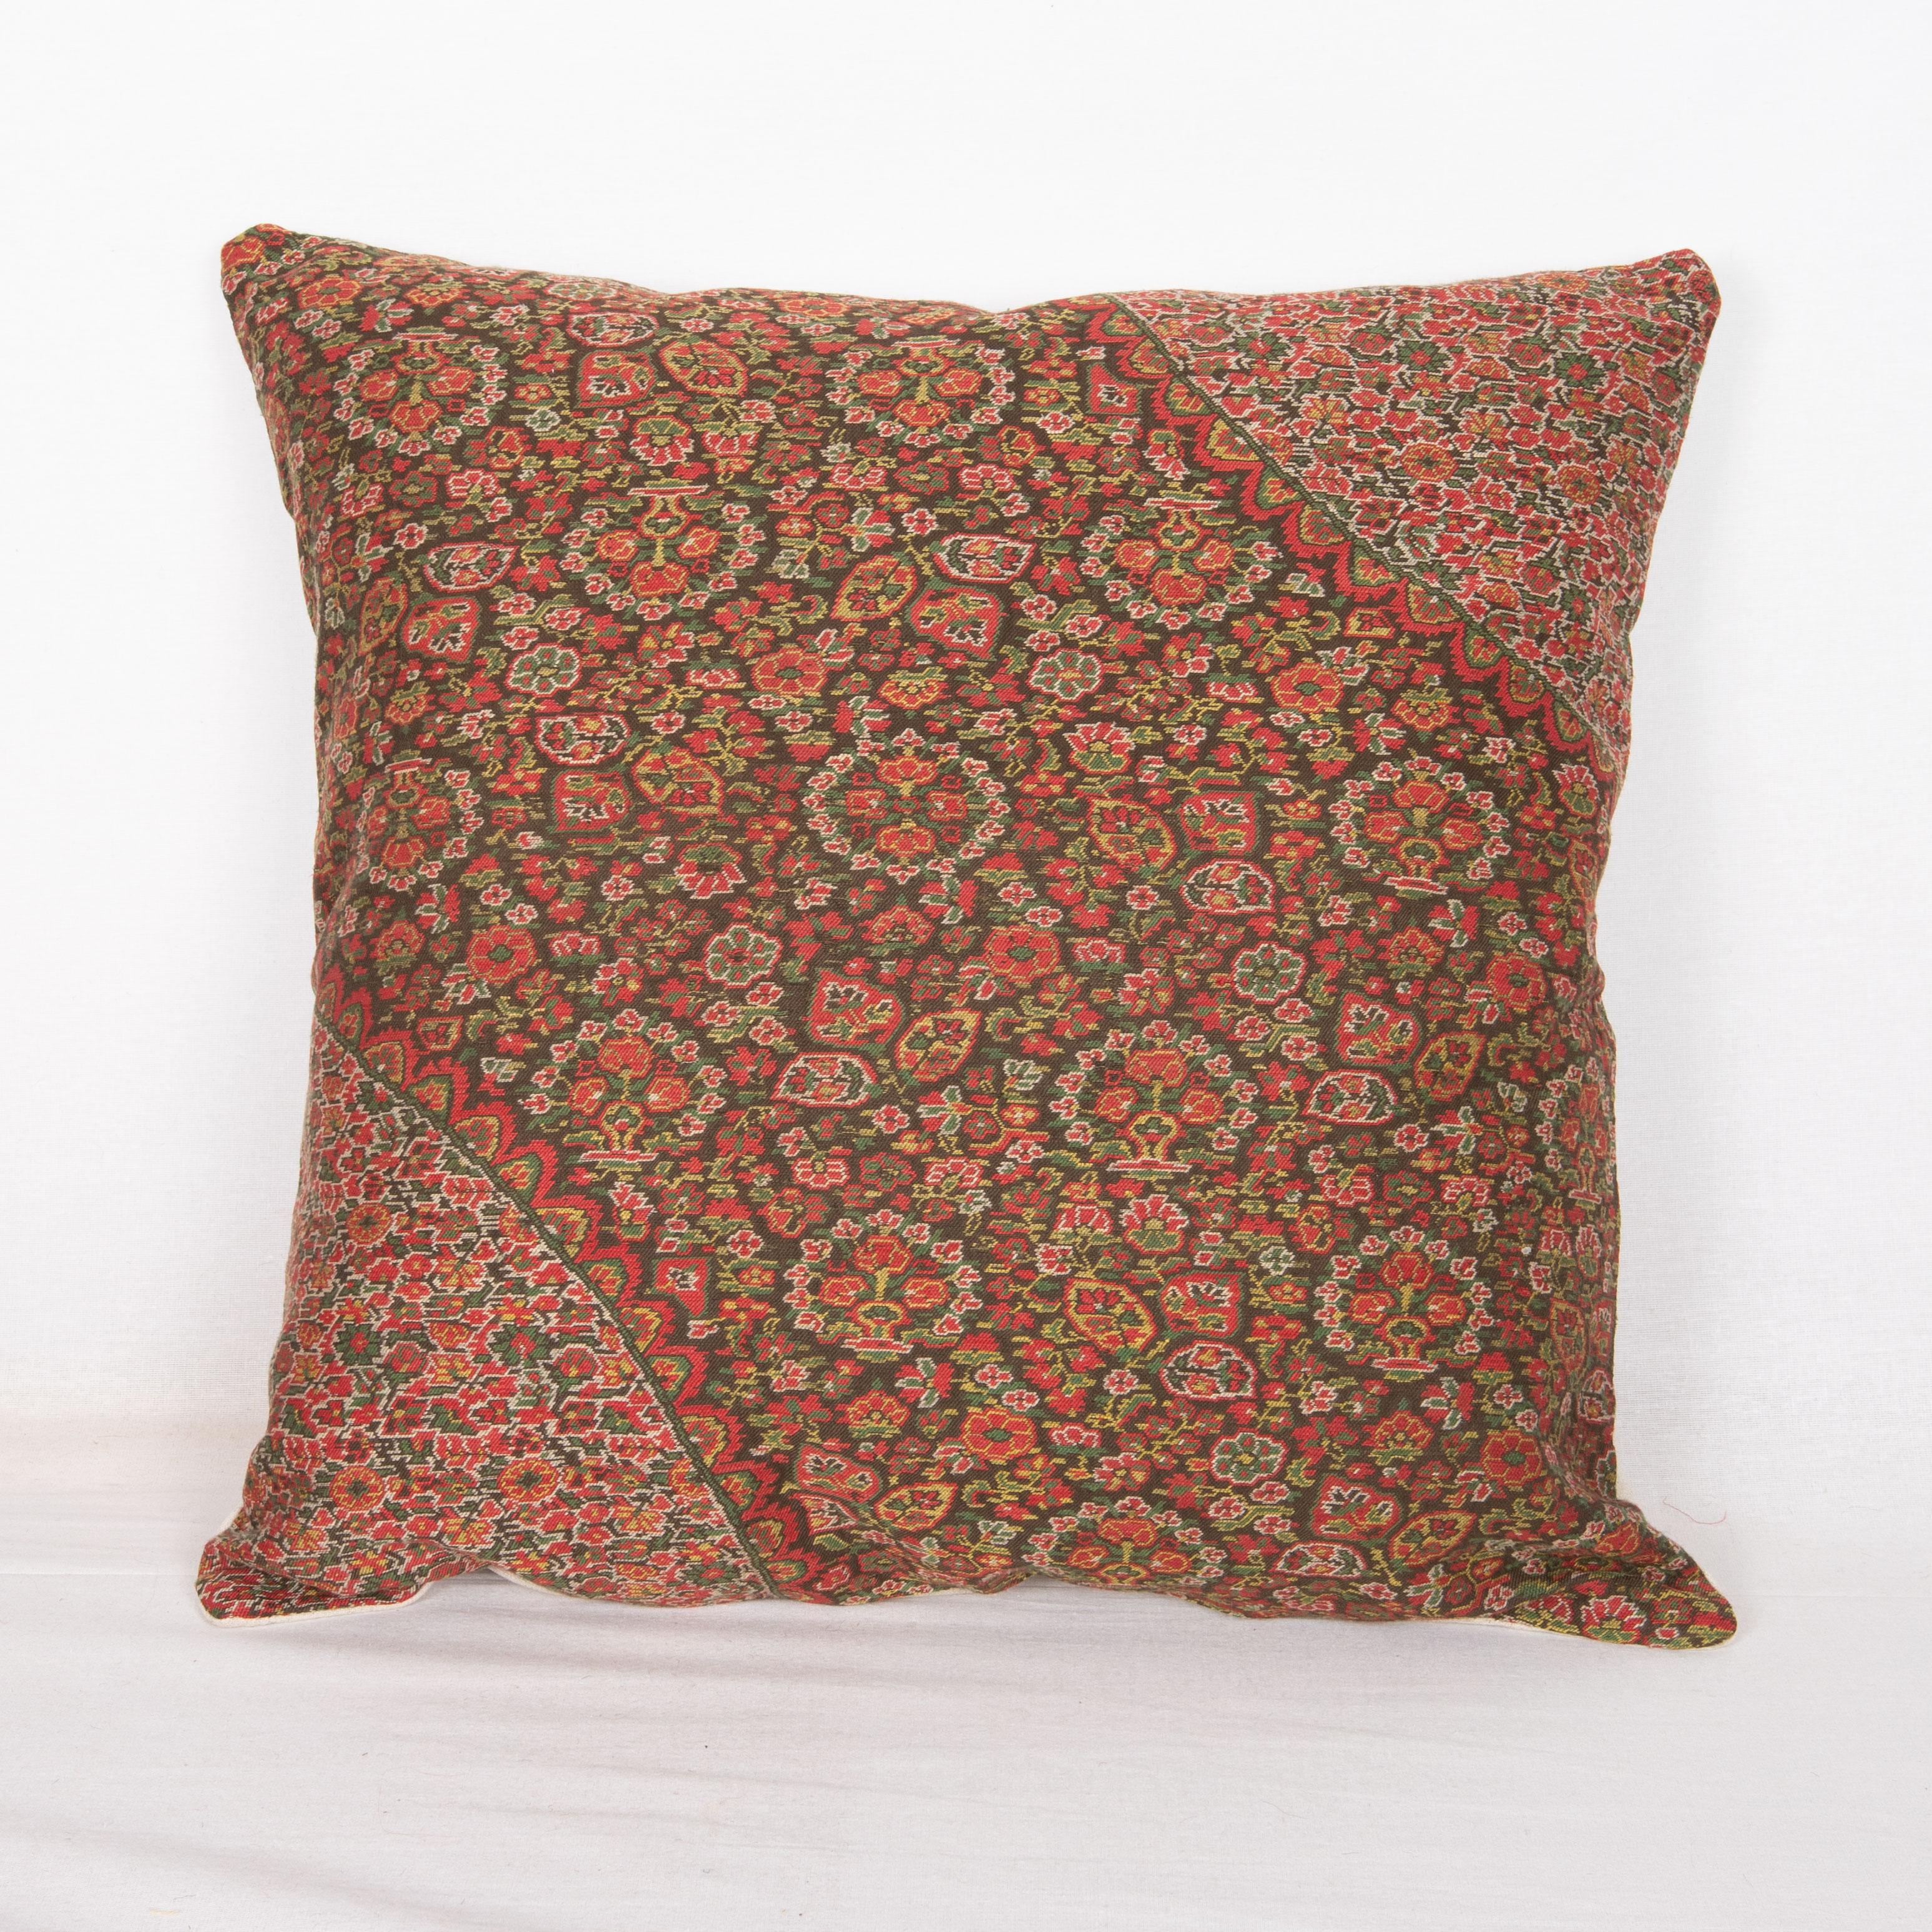 Antique Paisley pillow cover made from a European Wool Paisley Shawl, L 19th /E 20th century.
It does not come with an insert.
Linen in the back.
Zipper closure.
Dry. Cleaning is reccommeded.

Antique European Paisley shawls are a type of